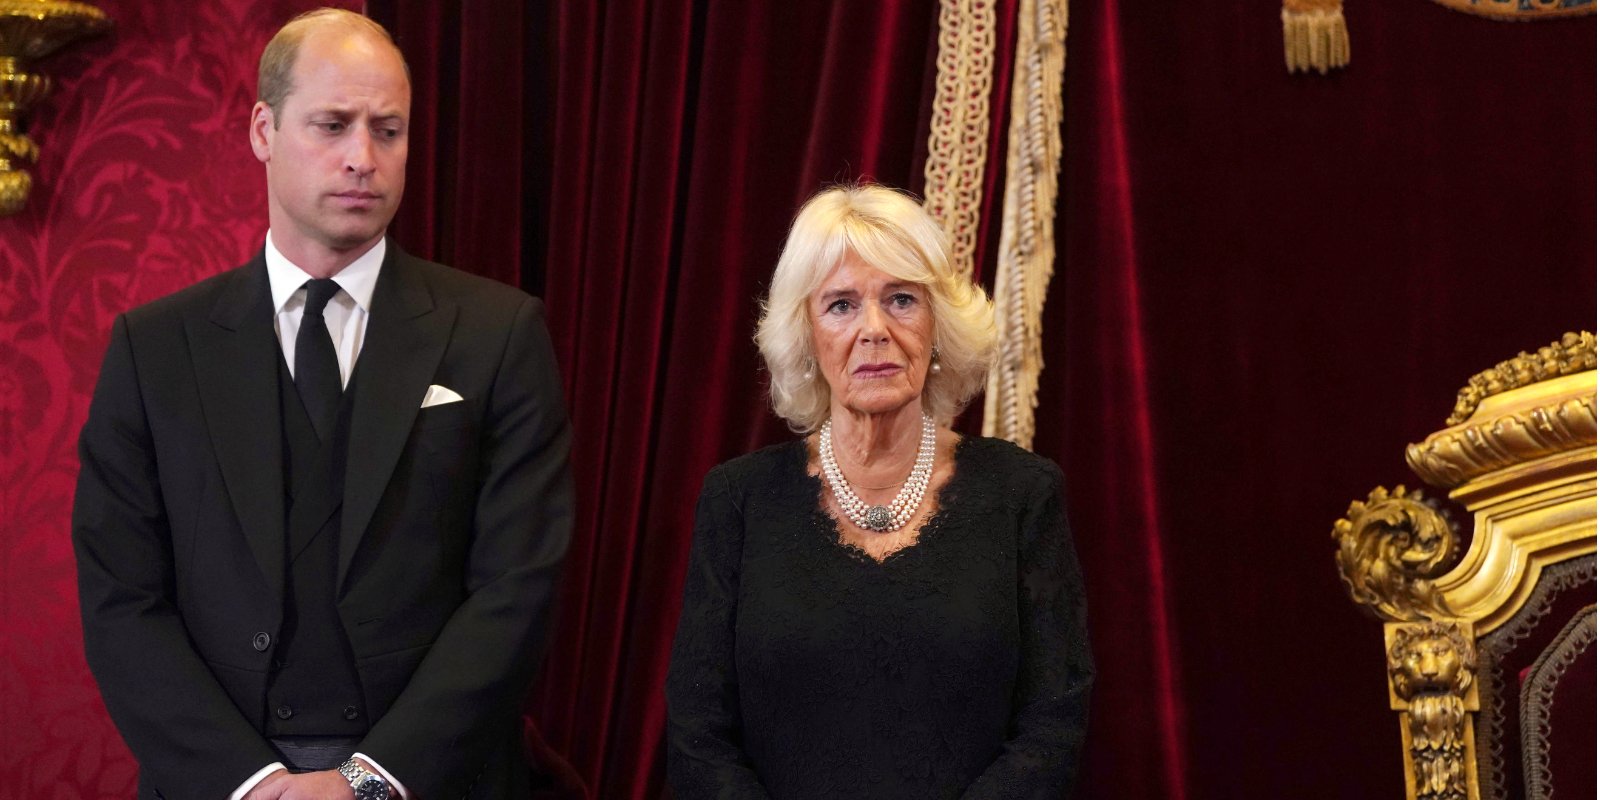 Prince William and Camilla Parker Bowles pose together during the accession council on September 10, 2022 in London, United Kingdom.